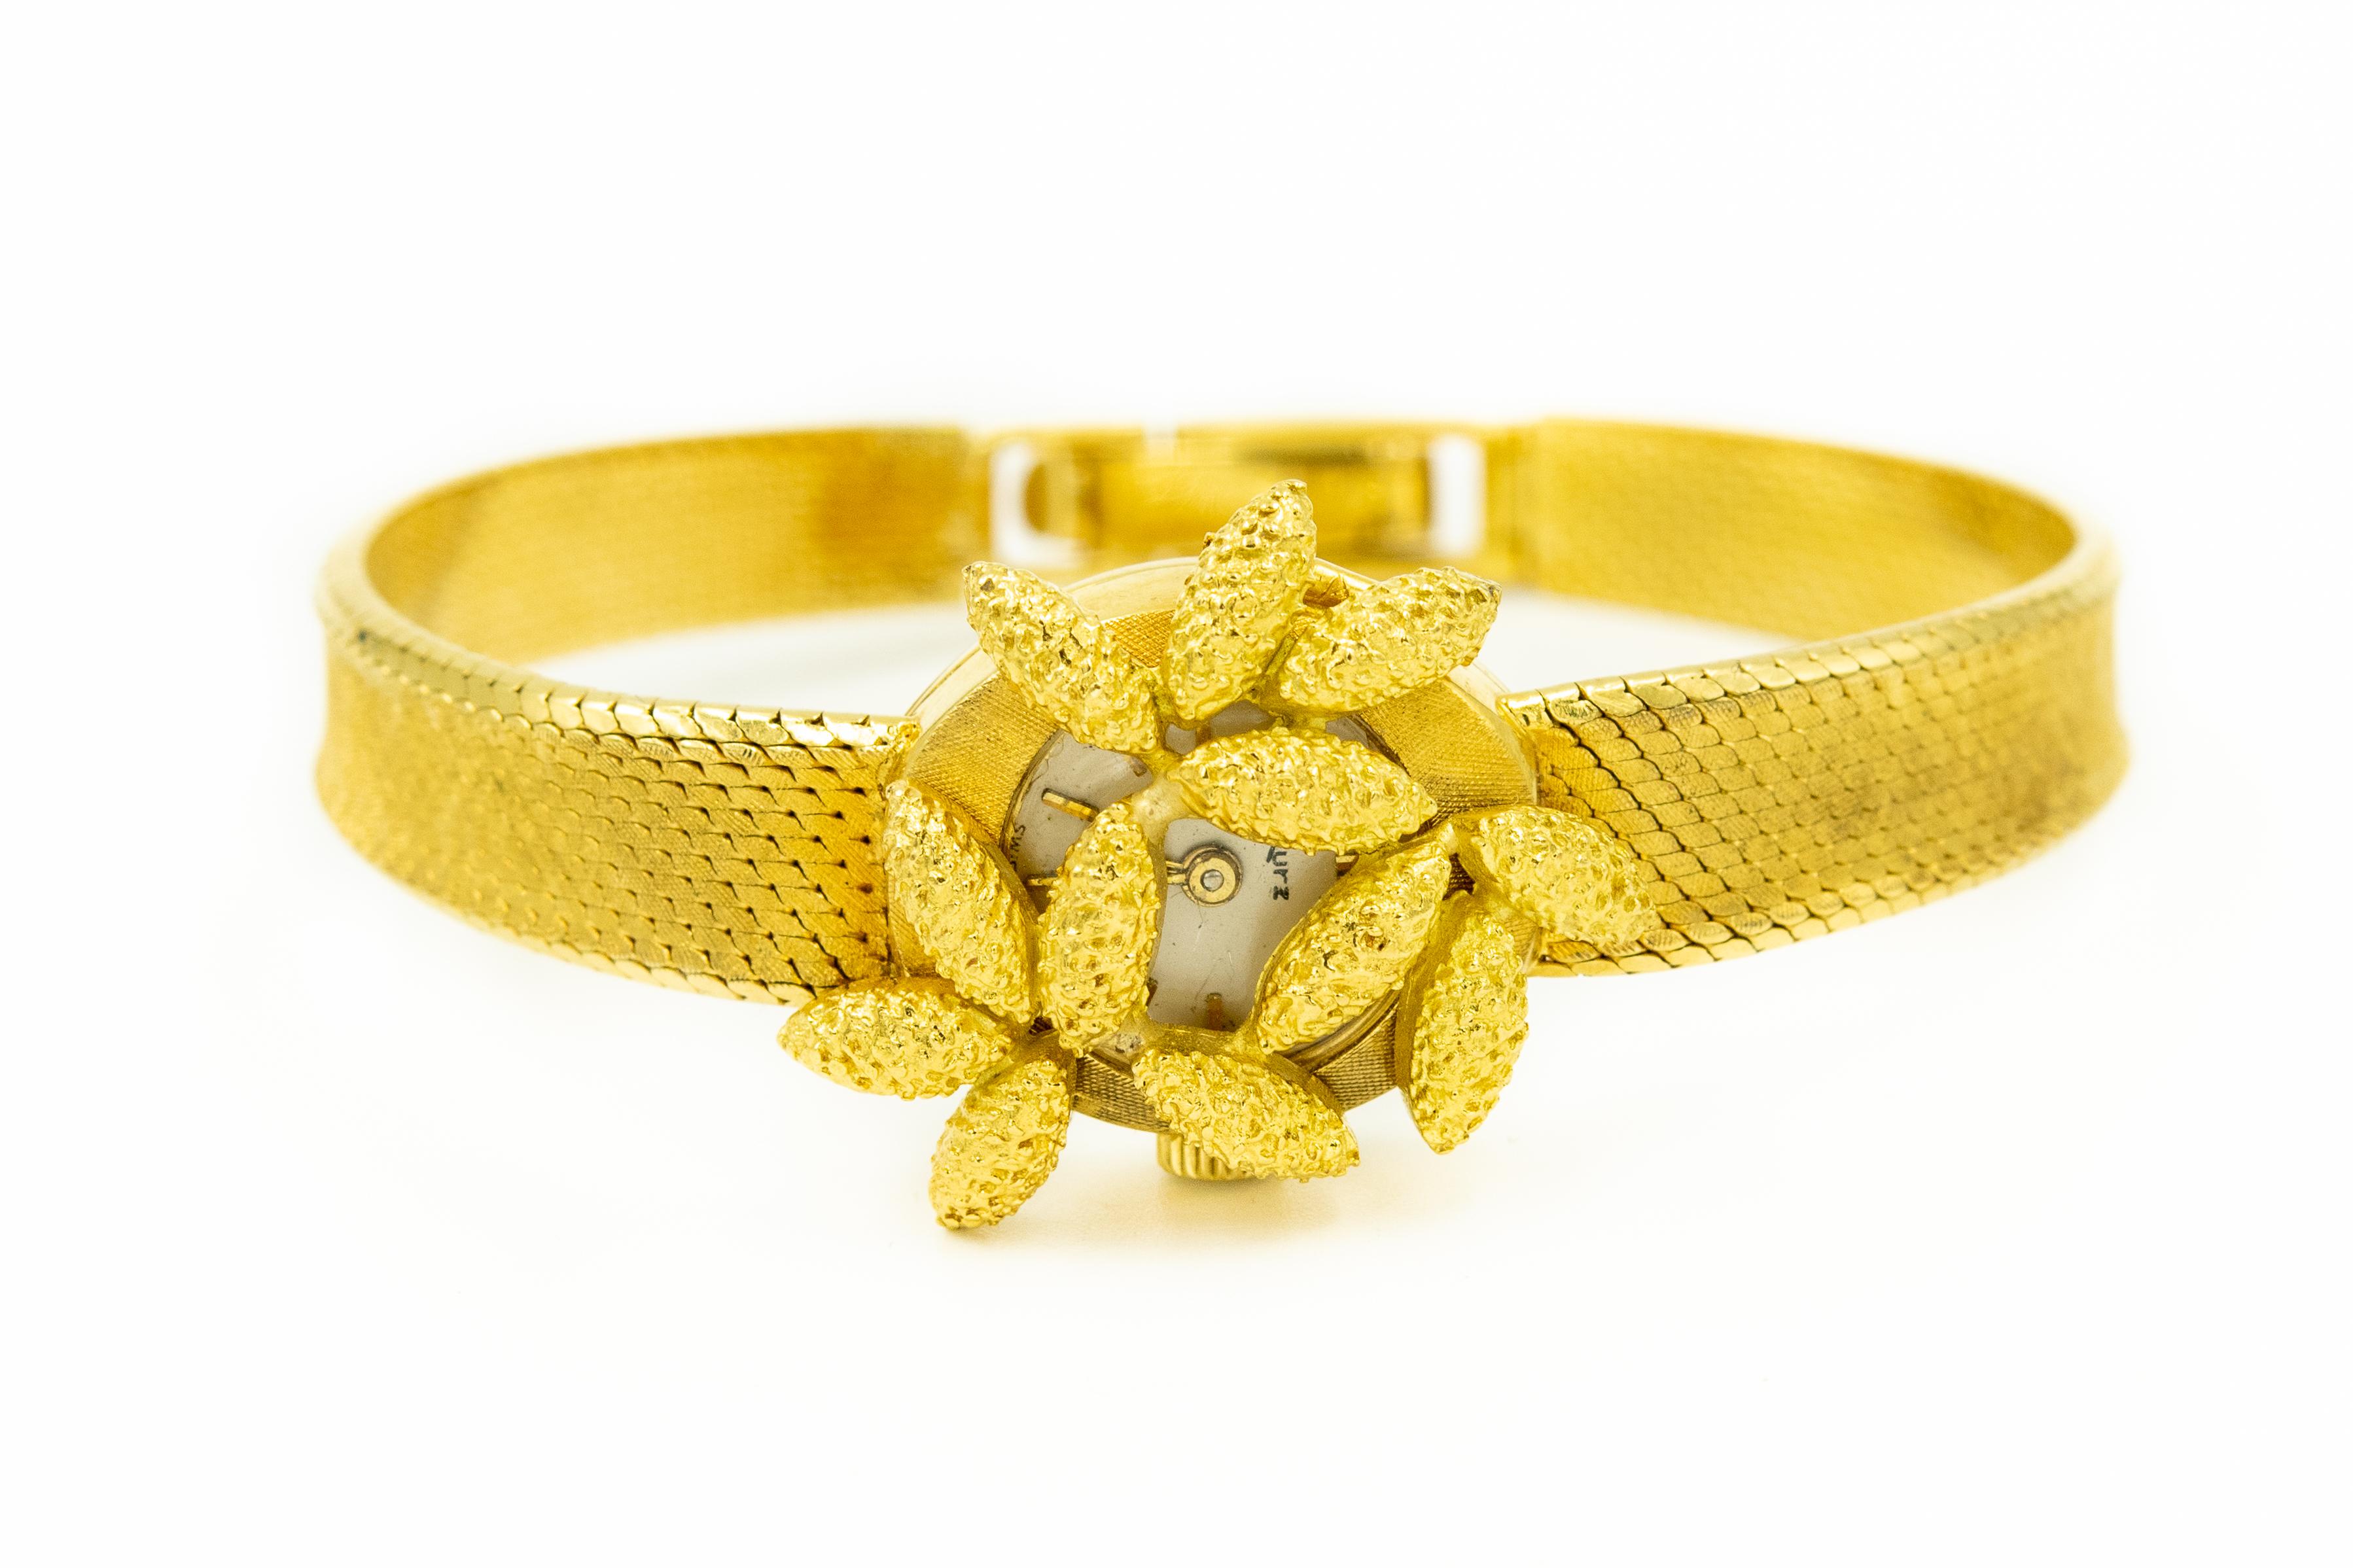 Stunning 18k yellow gold ladies watch by Kurz in Geneva featuring a hinged peek a boo style textured floral petal cover on a tightly woven design band that has a Florentine finish .  The floral section cover hinges at an angle to reveal the watch